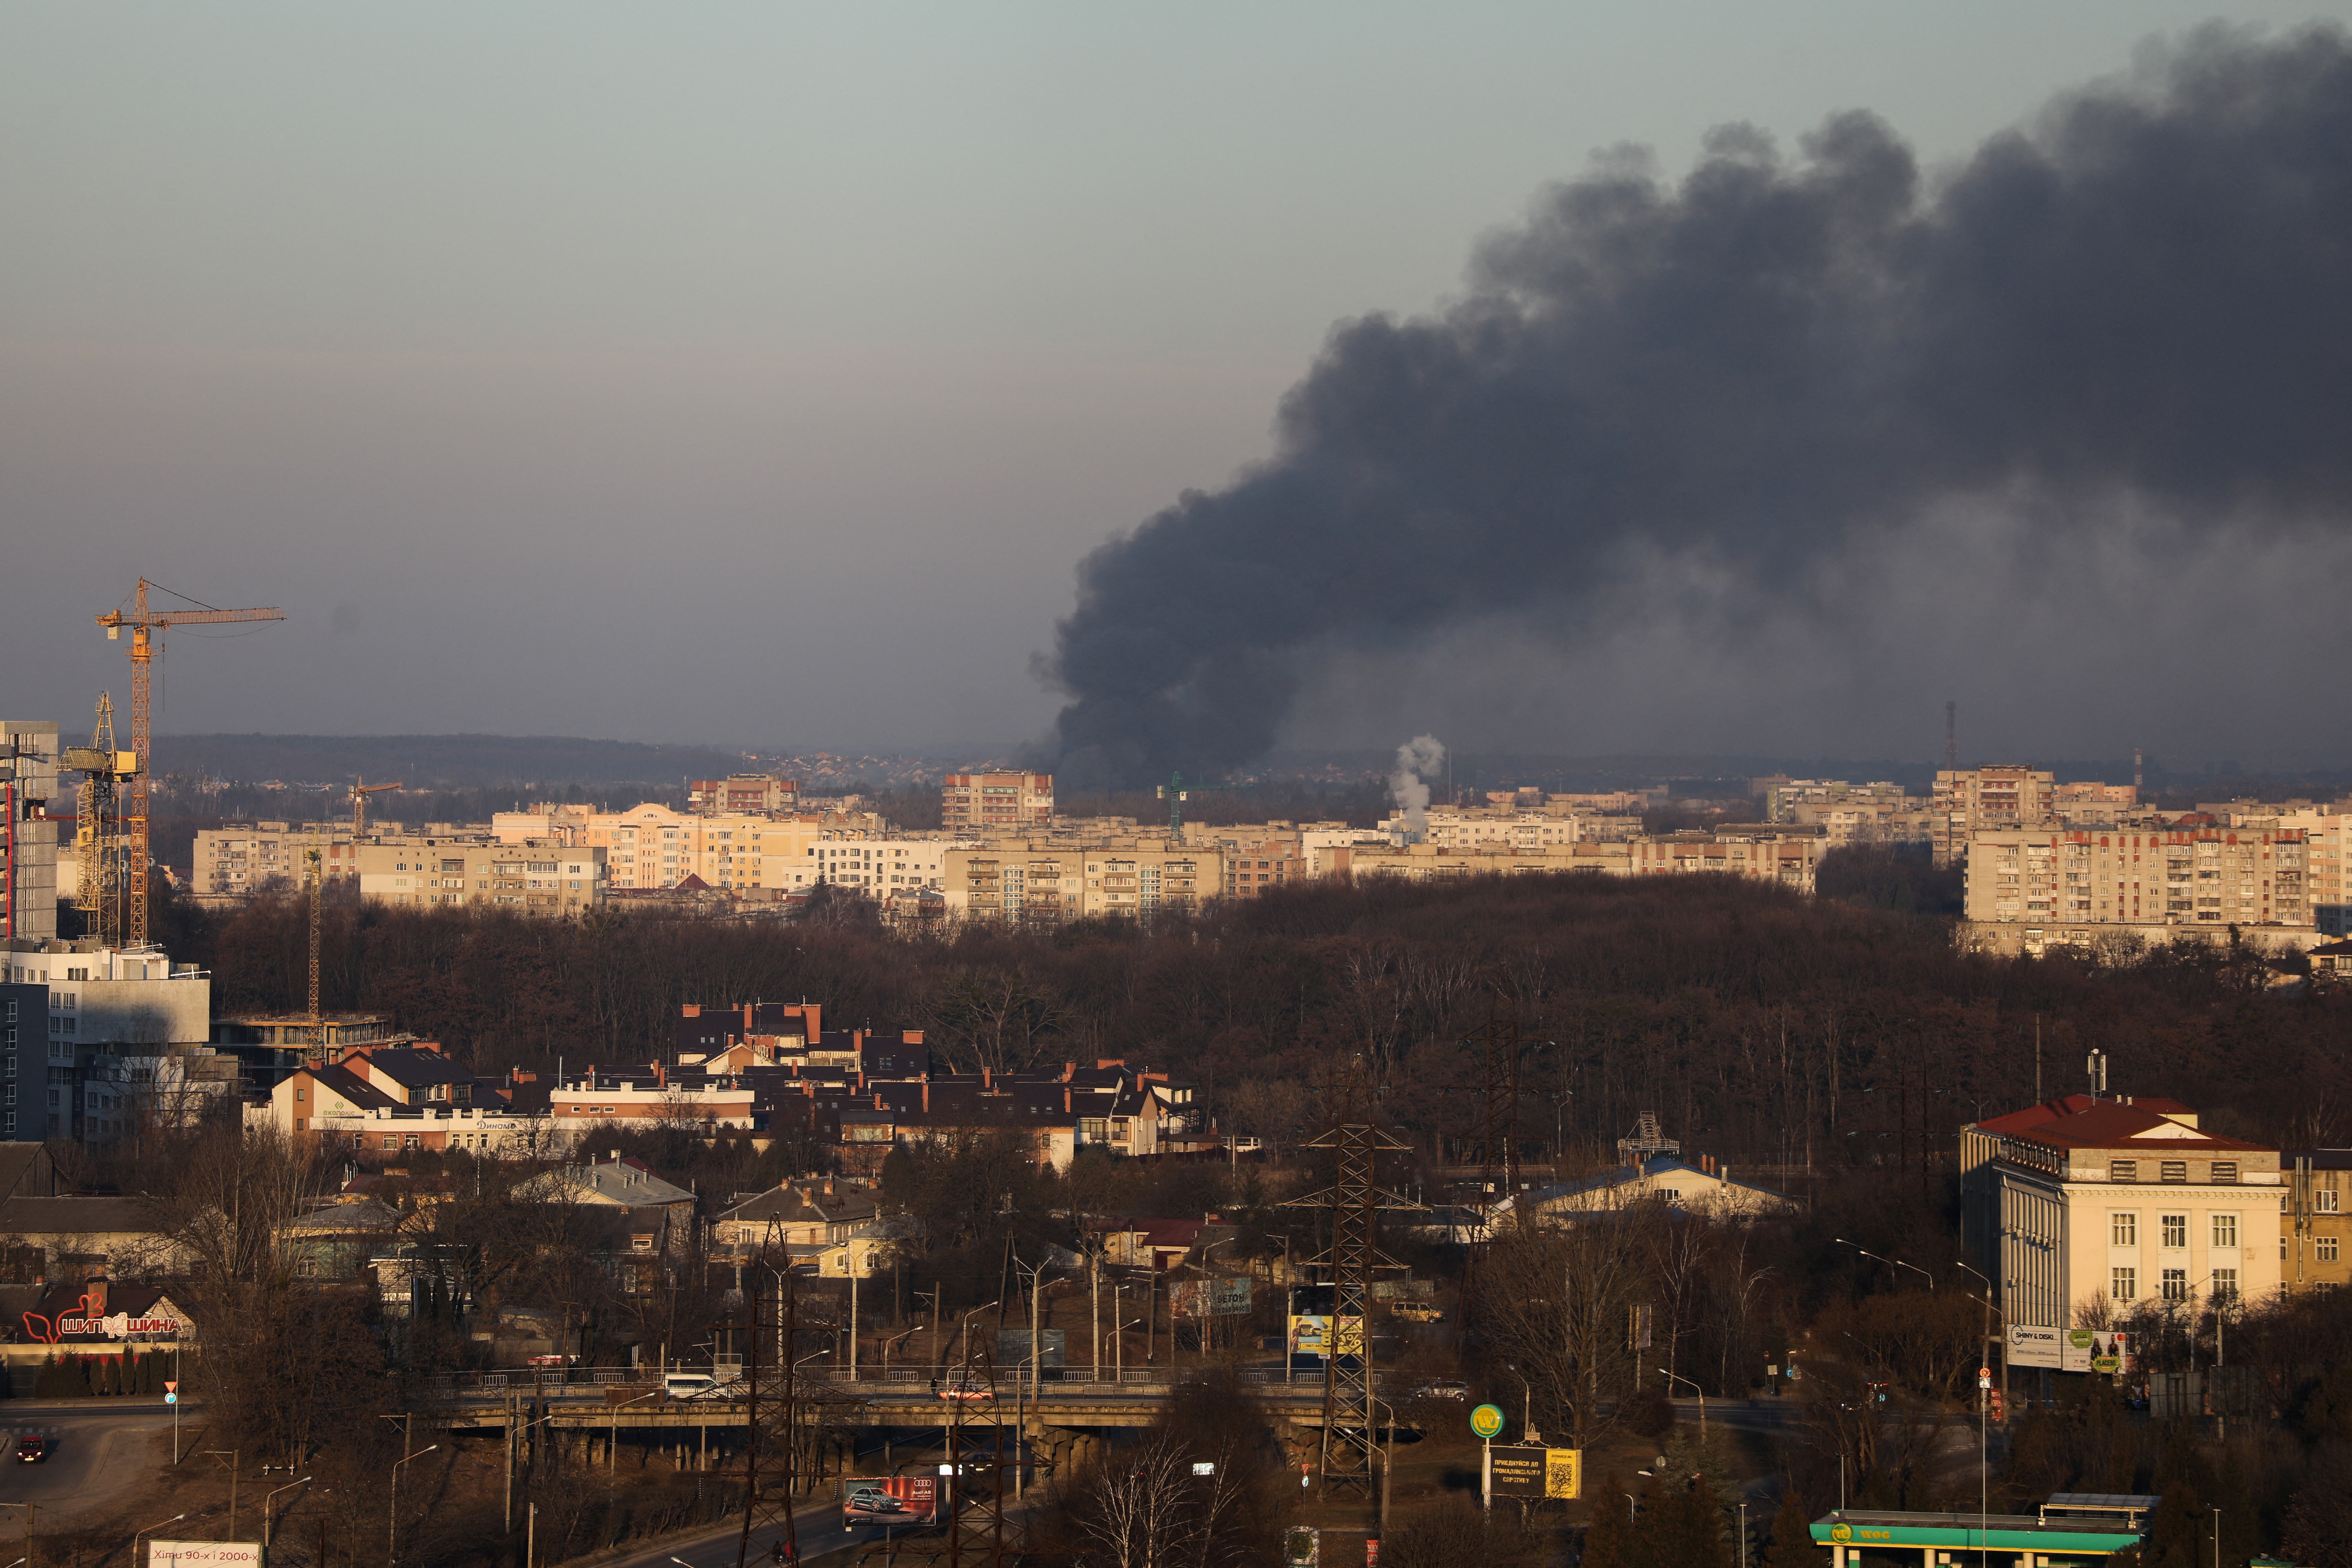 Smoke rises above buildings near the airport in Lviv, Ukraine, on March 18.